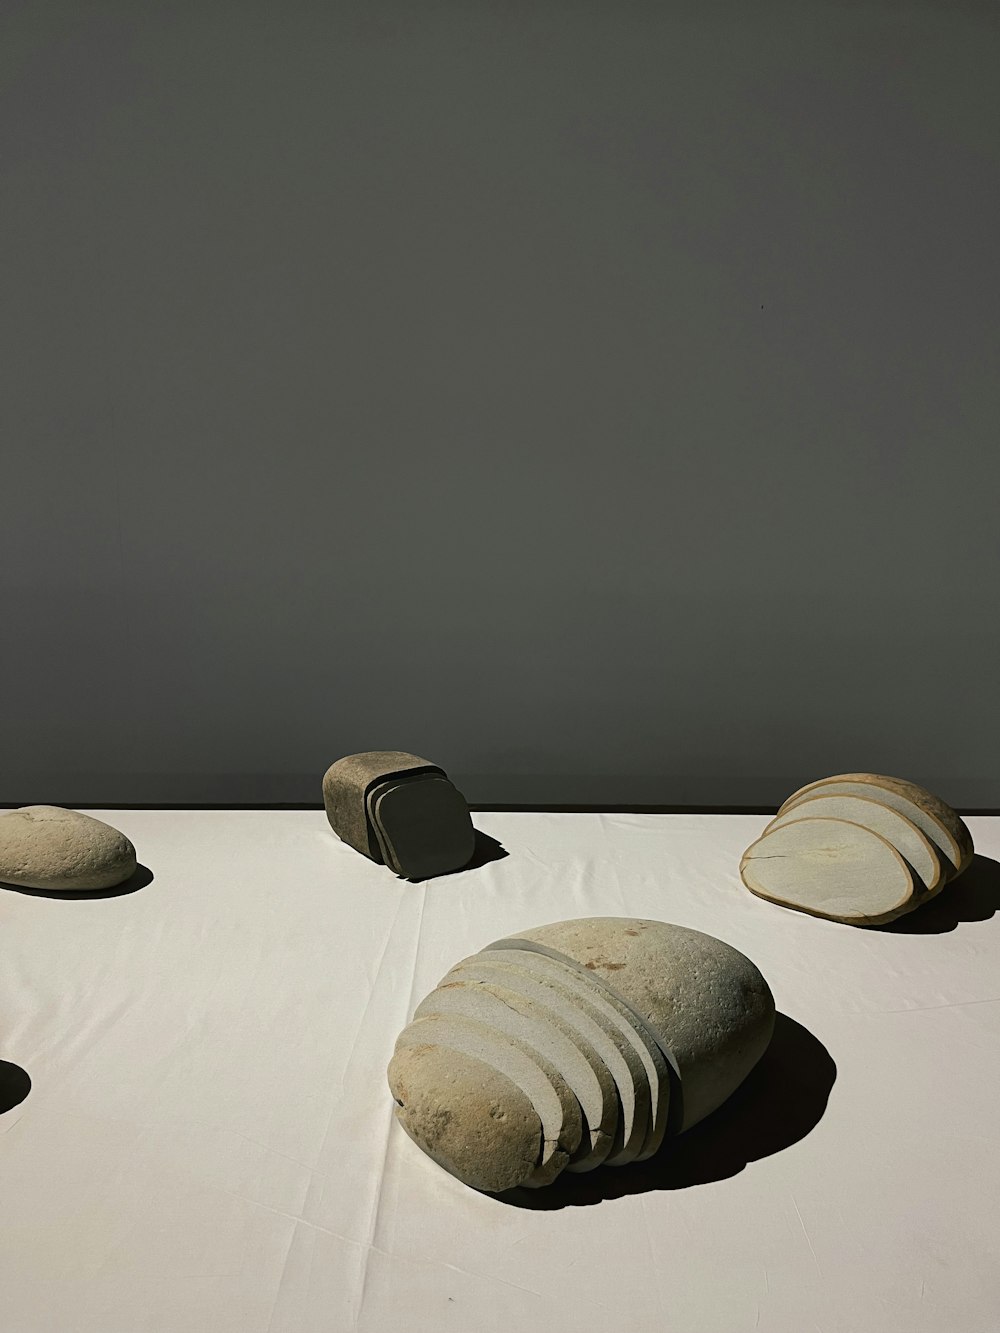 a group of rocks sitting on top of a white sheet